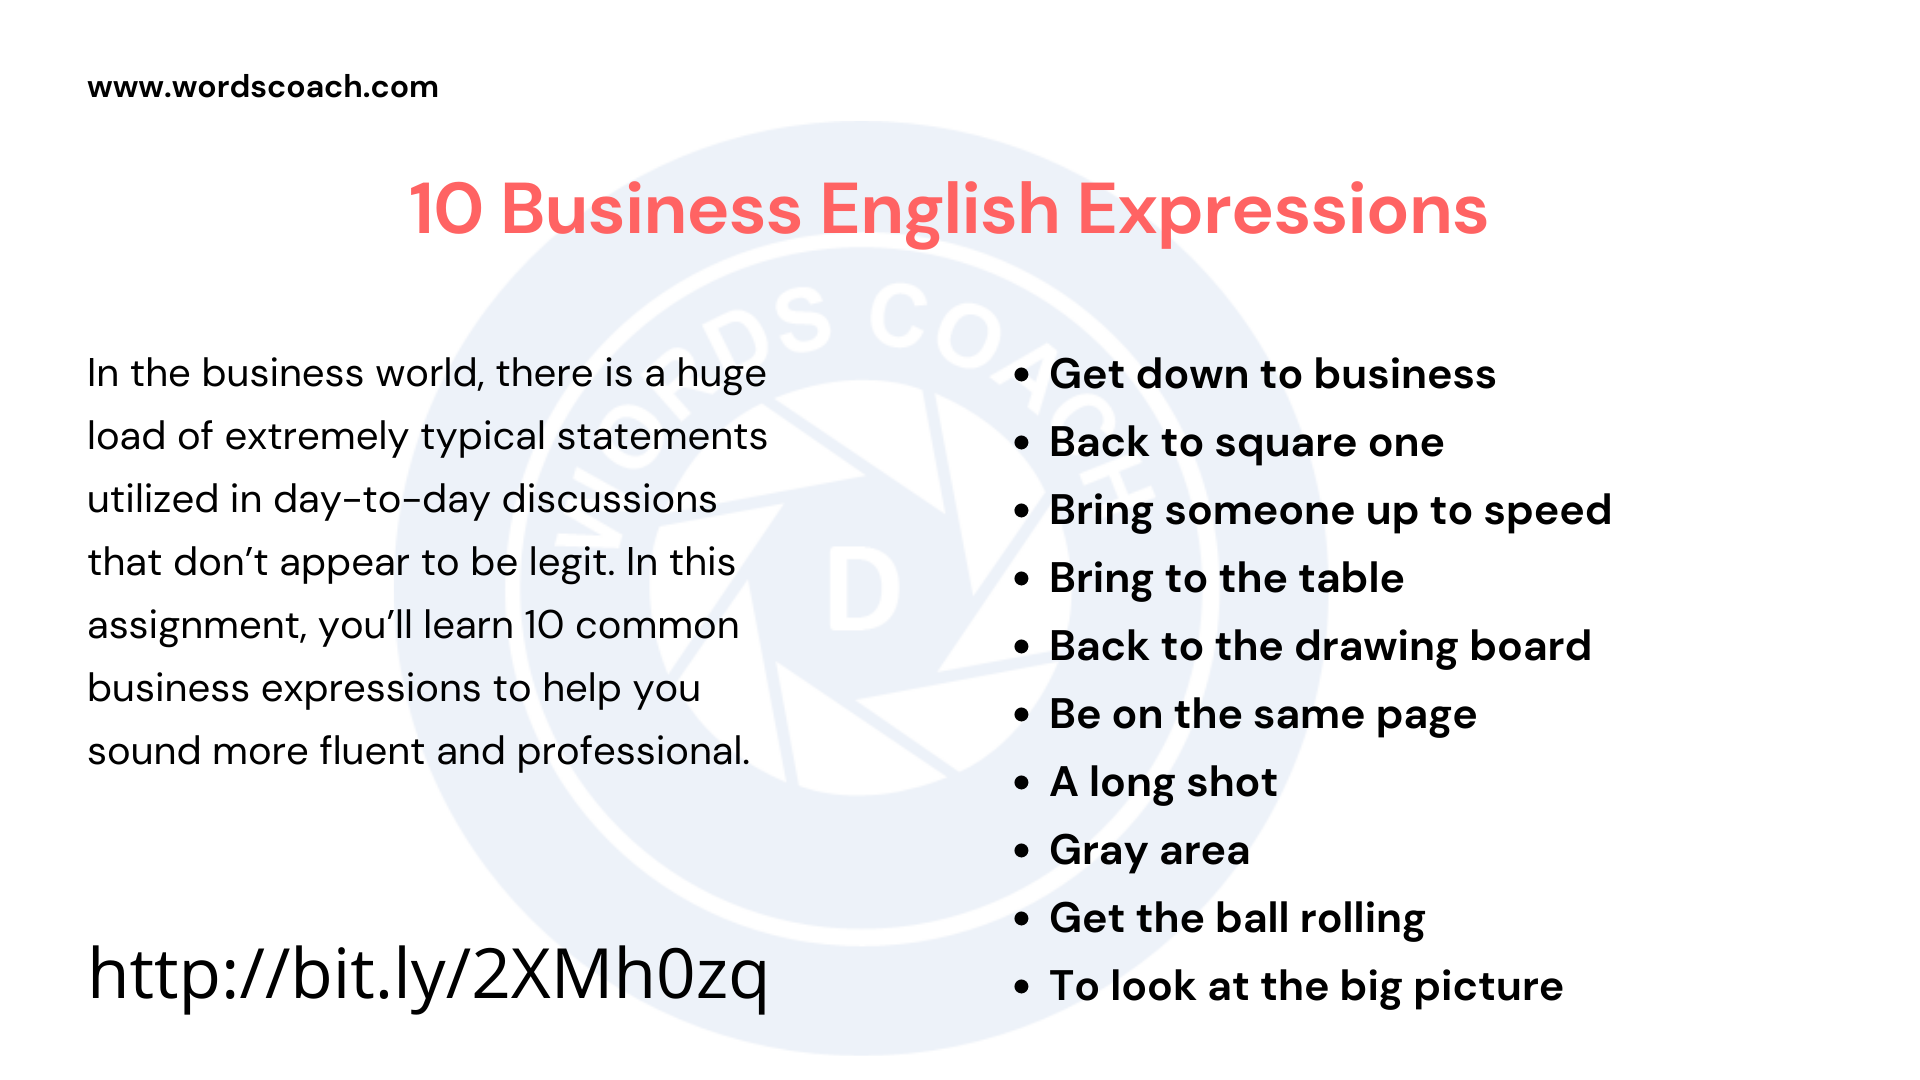 10 Business English Expressions - wordscoach.com